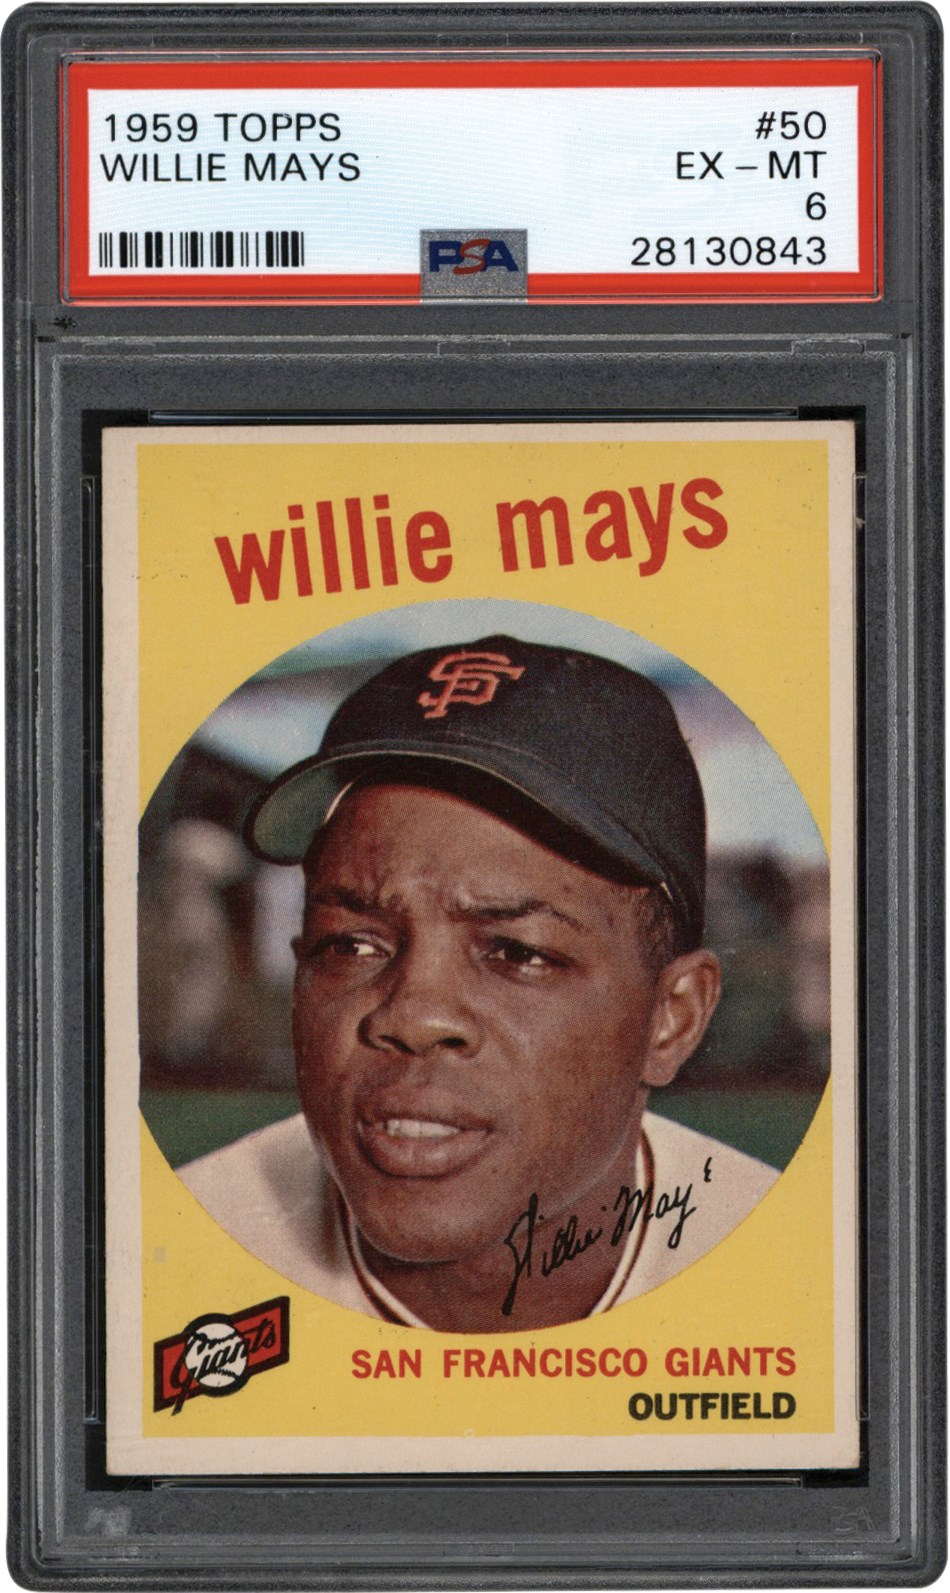 Baseball and Trading Cards - 1959 Topps PSA Collection w/Willie Mays (24)